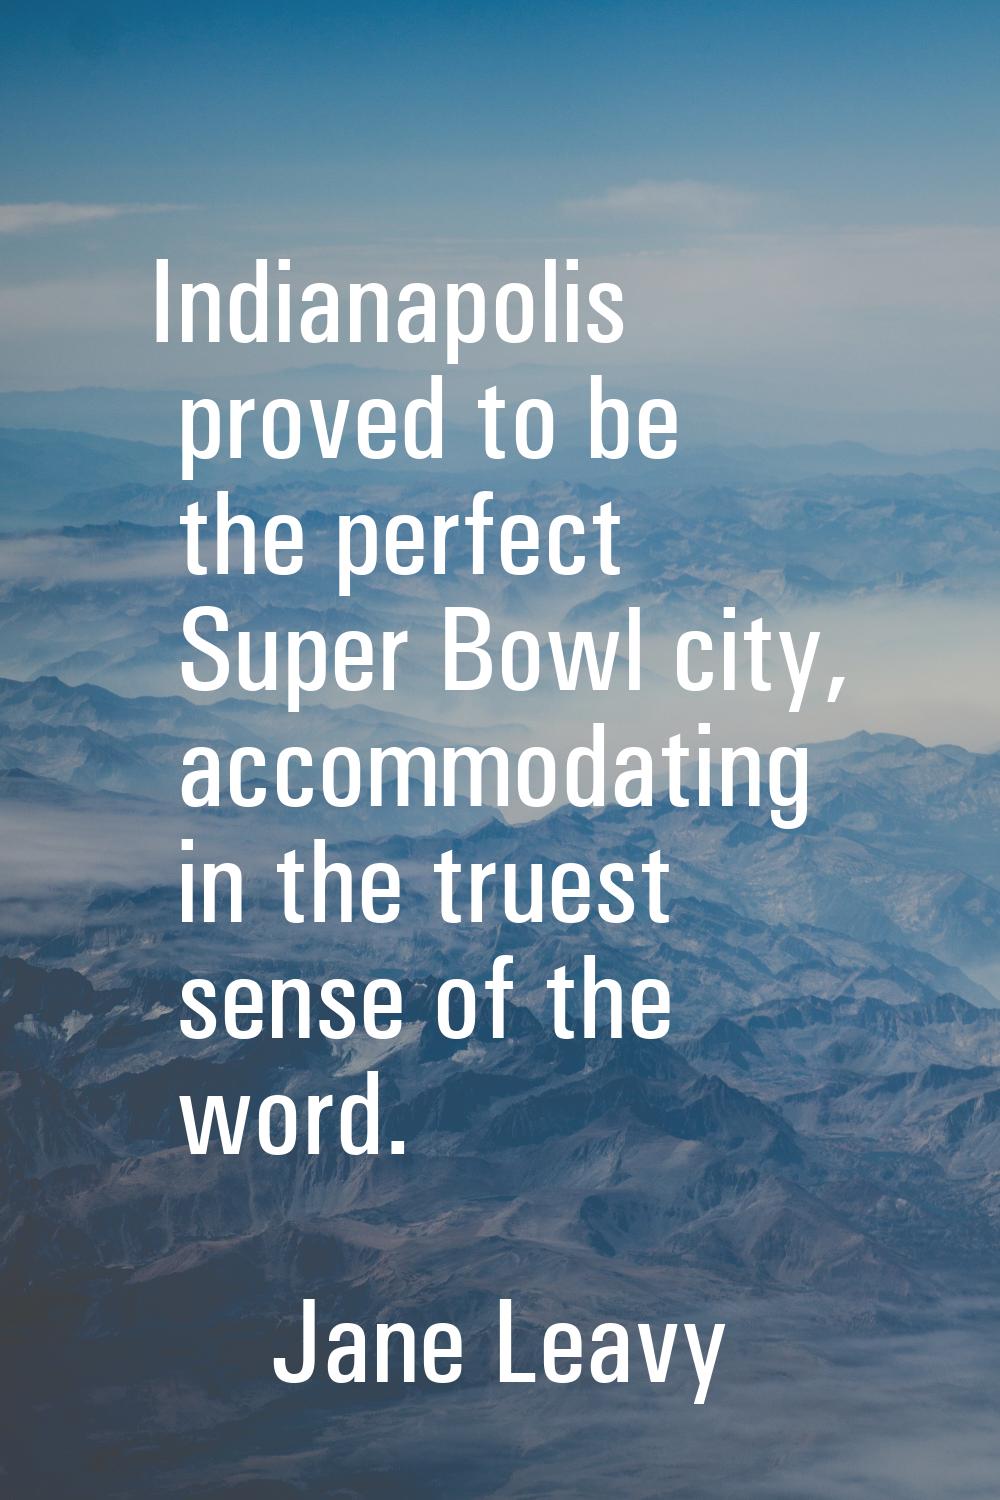 Indianapolis proved to be the perfect Super Bowl city, accommodating in the truest sense of the wor